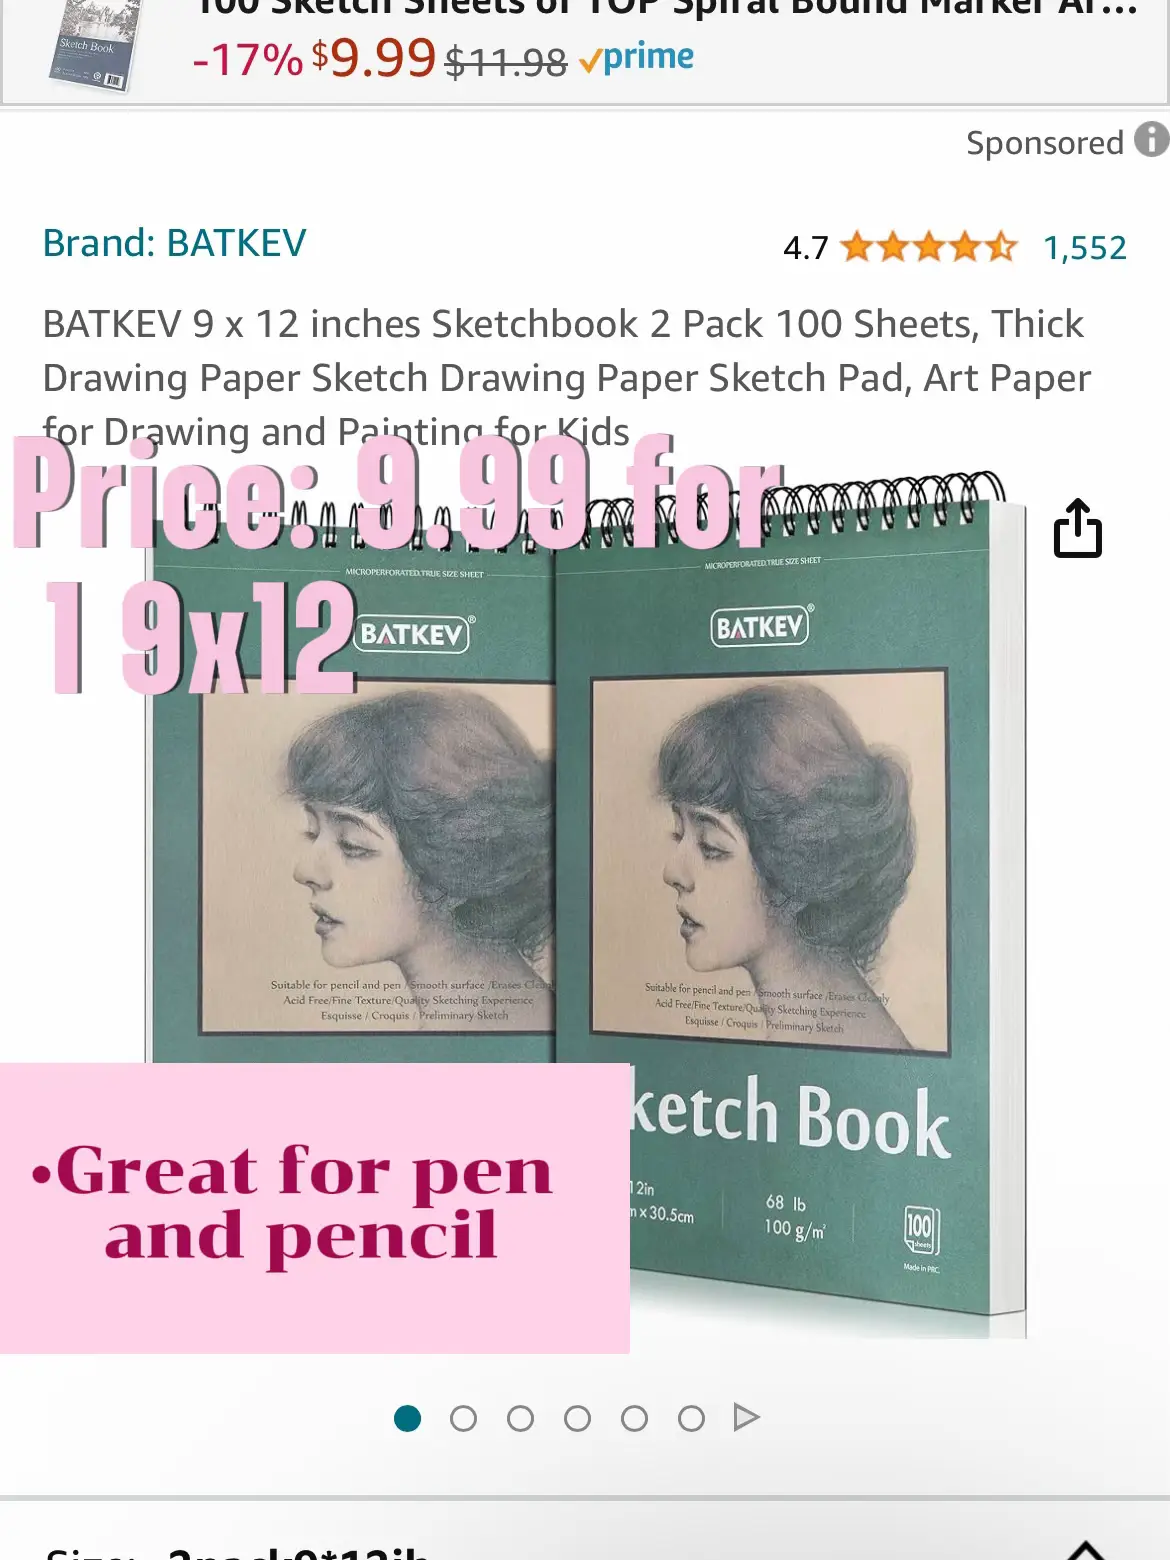 BATKEV 5.5 x 8.5 Inches Sketchbook 2 Pack 100 Sheets, Thick Drawing Paper Sketch Drawing Paper Sketch Pad, Art Paper for Drawing and Painting for